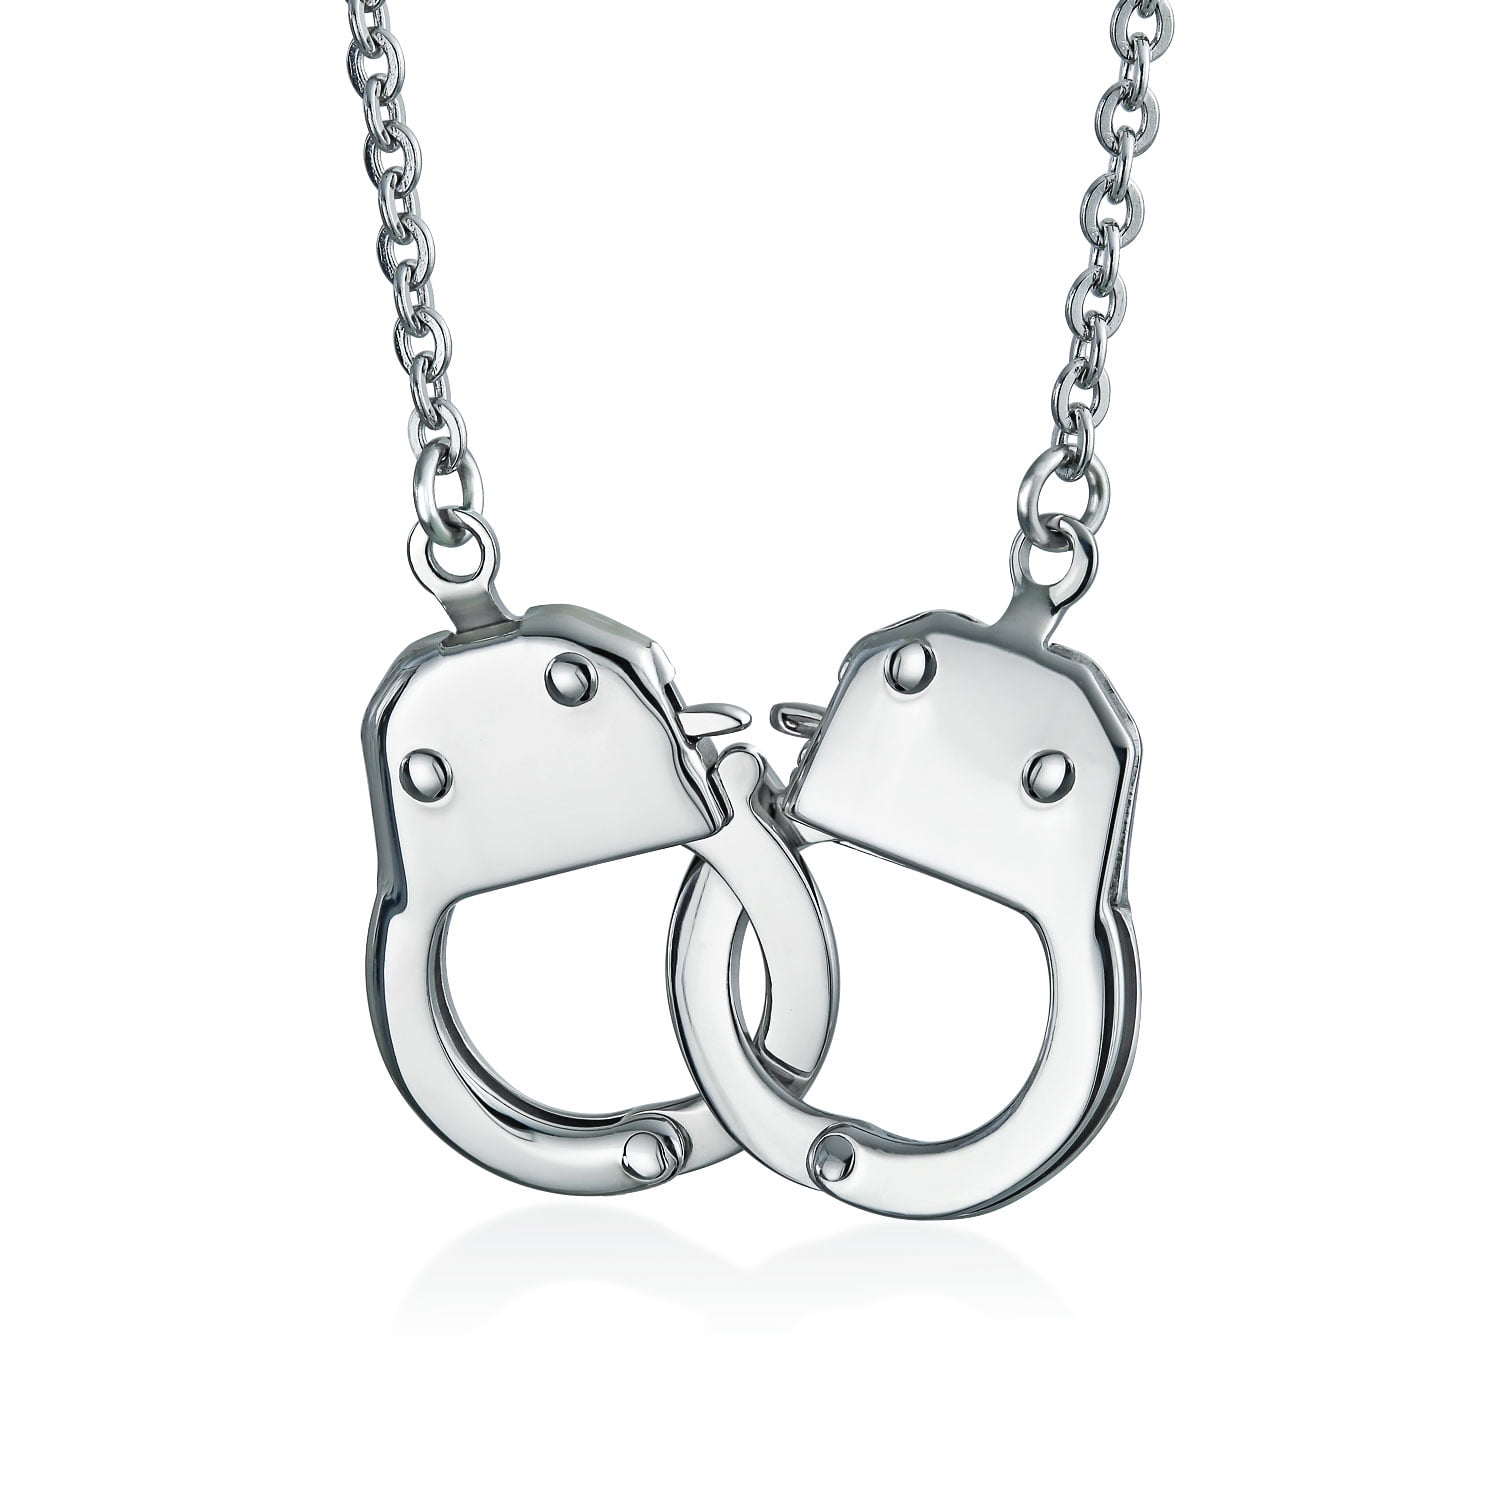 Handcuff Necklace Lock Partners in  Stainless Steel Pendant